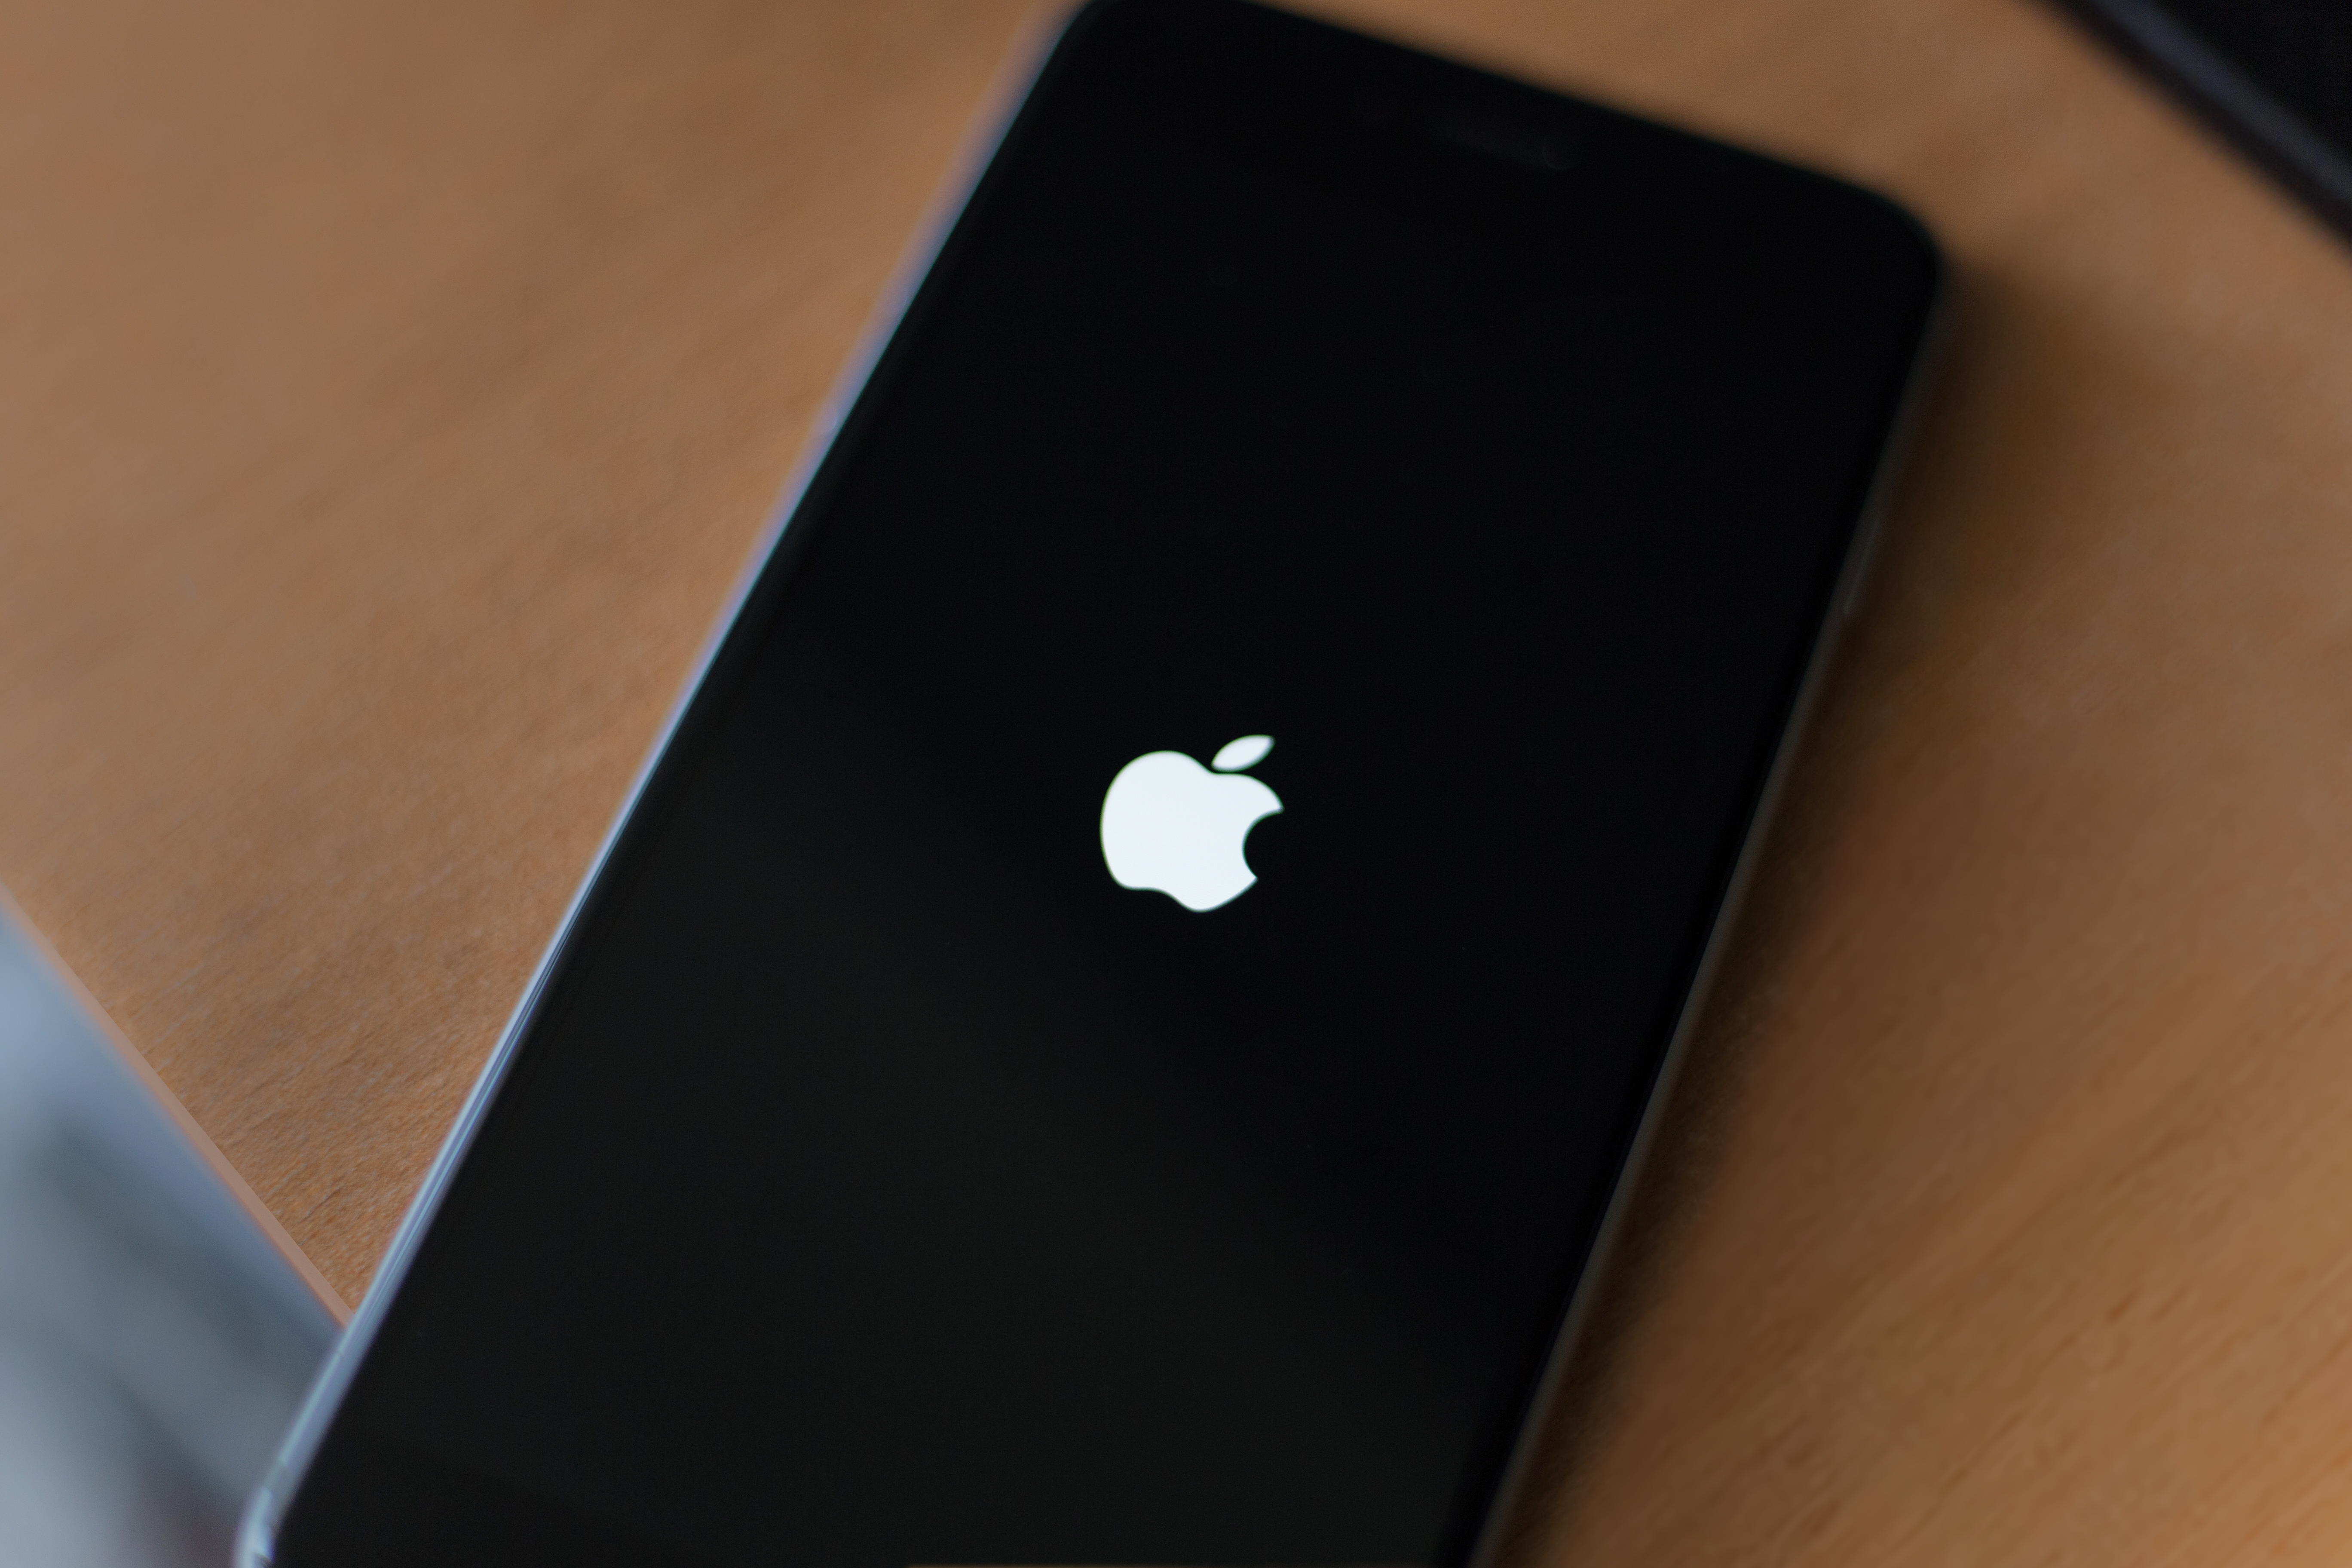 Apple has updated its latest version of iOS after reports of security flaws.